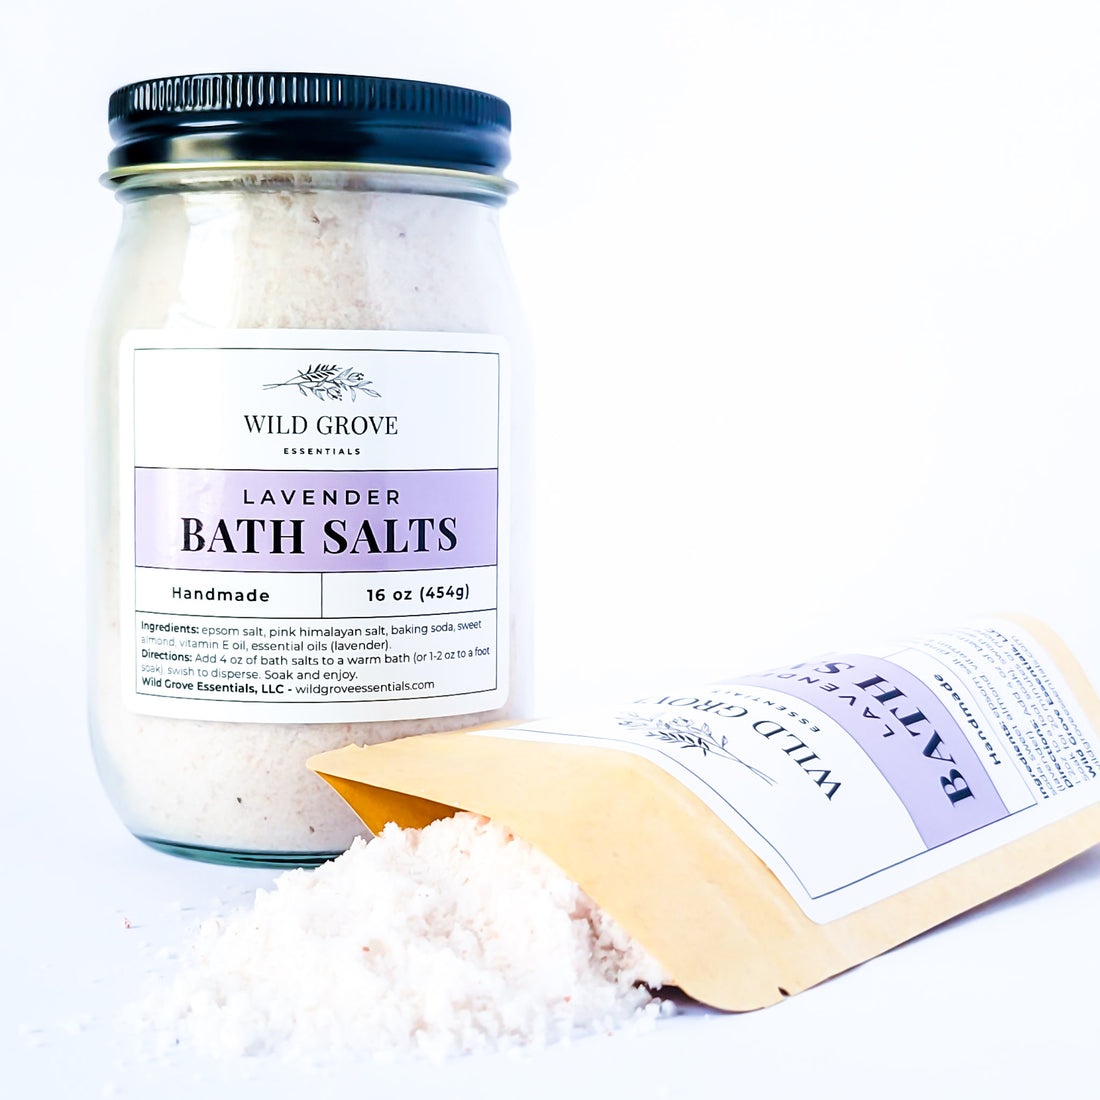 Why Bother with Bath Salts?